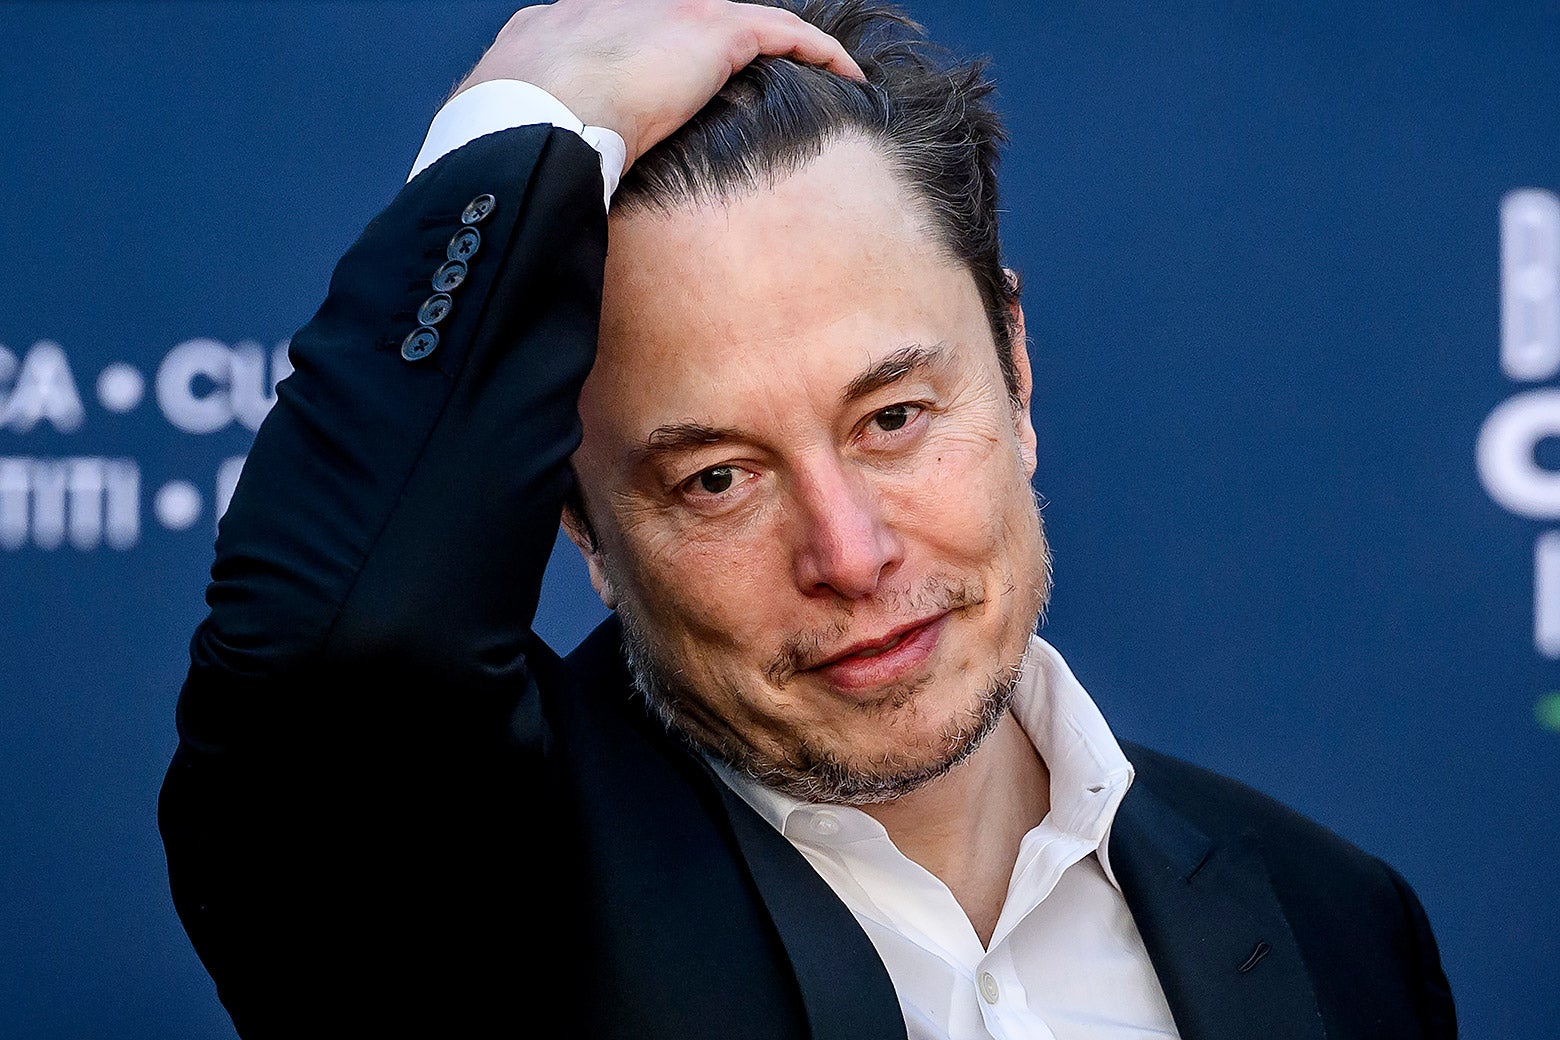 Musk, wearing a white shirt and navy blazer, runs his hand through his hair and looks mildly frustrated.